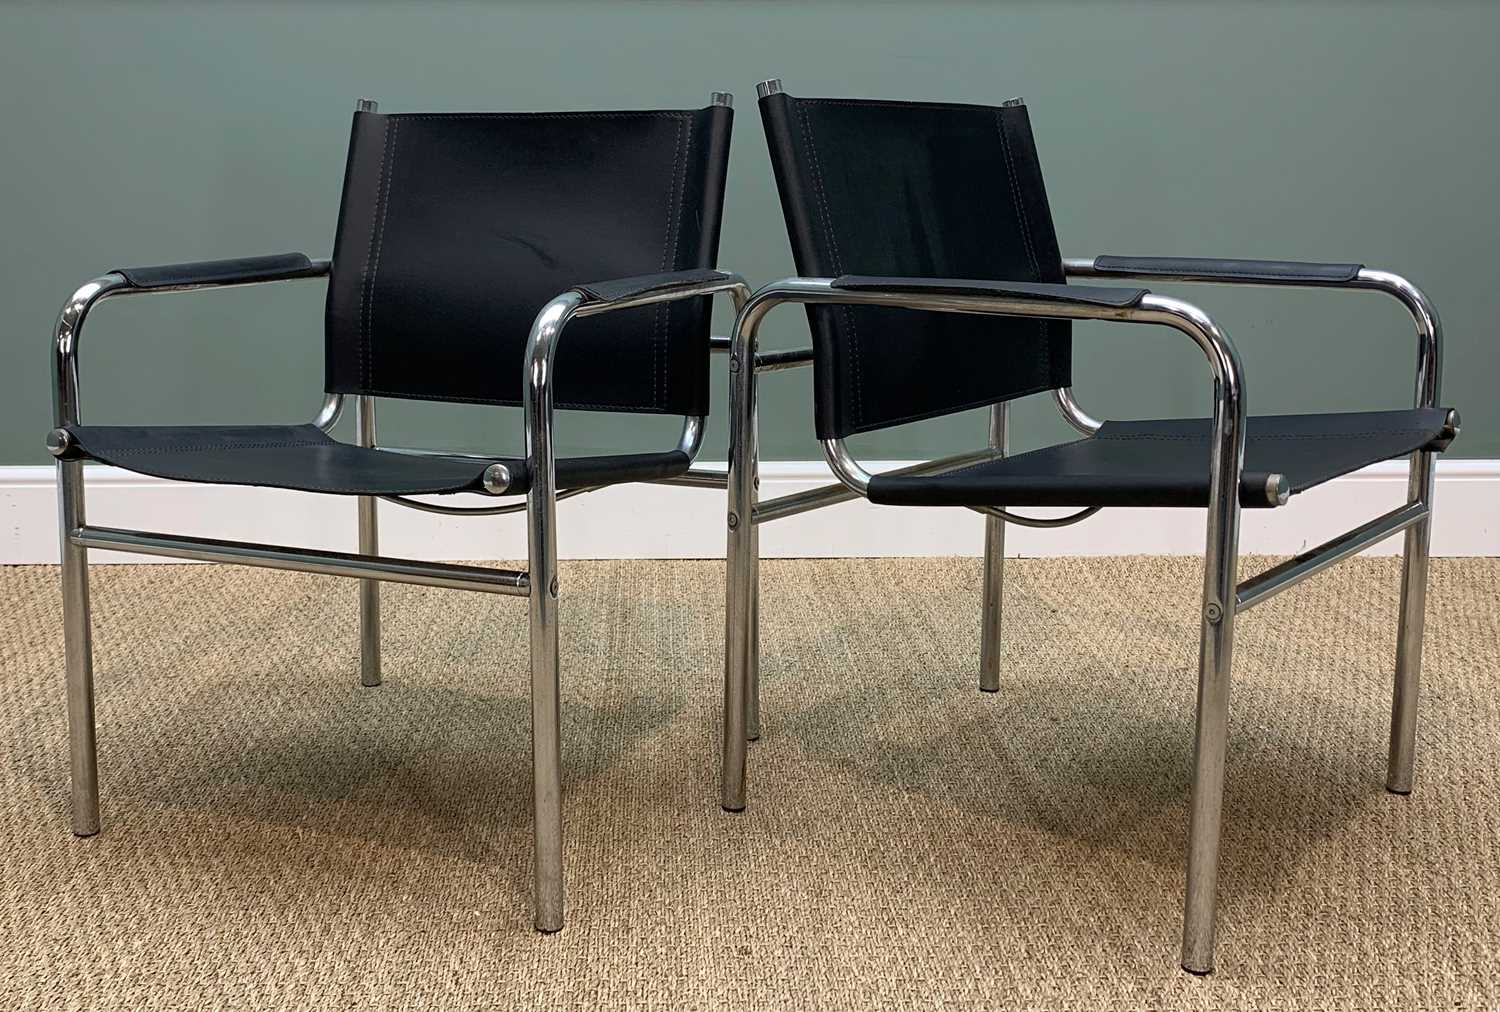 CHROME AND BLACK LEATHER KLINTE ARMCHAIRS, after a design by Tord Bjorklund Provenance: consigned